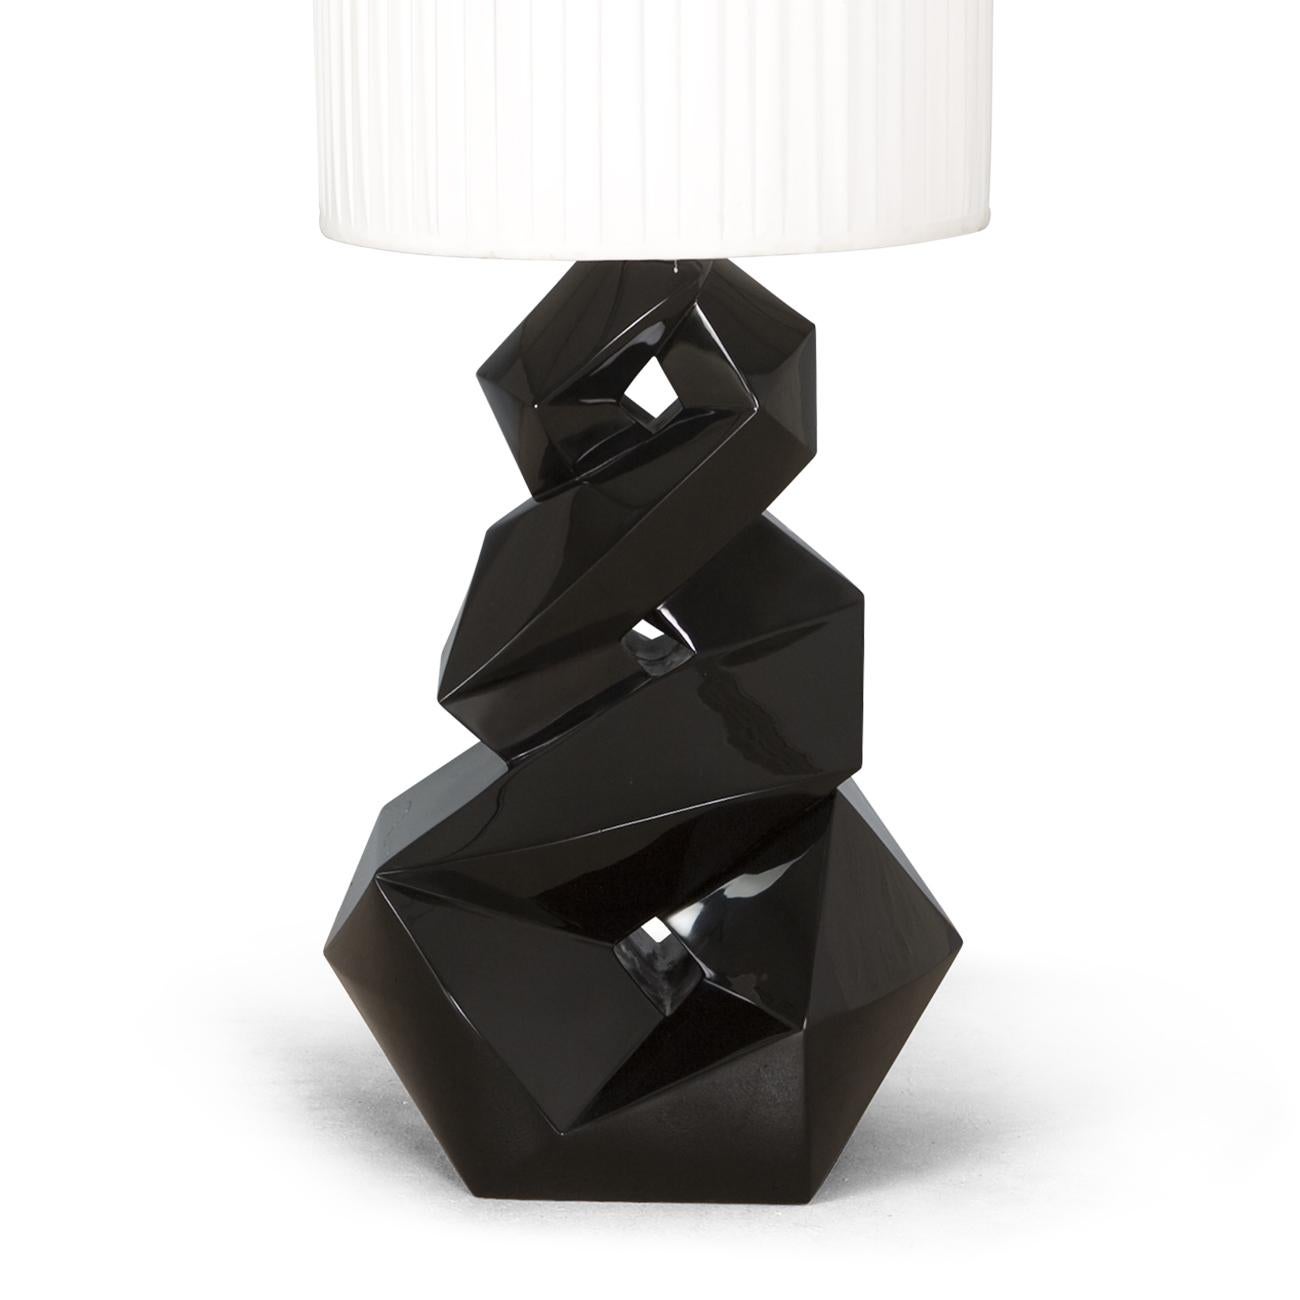 Floor Lamp or Table lamp artemus black in black 
lacquered finish hand-sculpted on solid mahogany wood.
With off-white plited shade. With dimmer light
control, CE standard or UL standard.
Also available in antique gold finish.